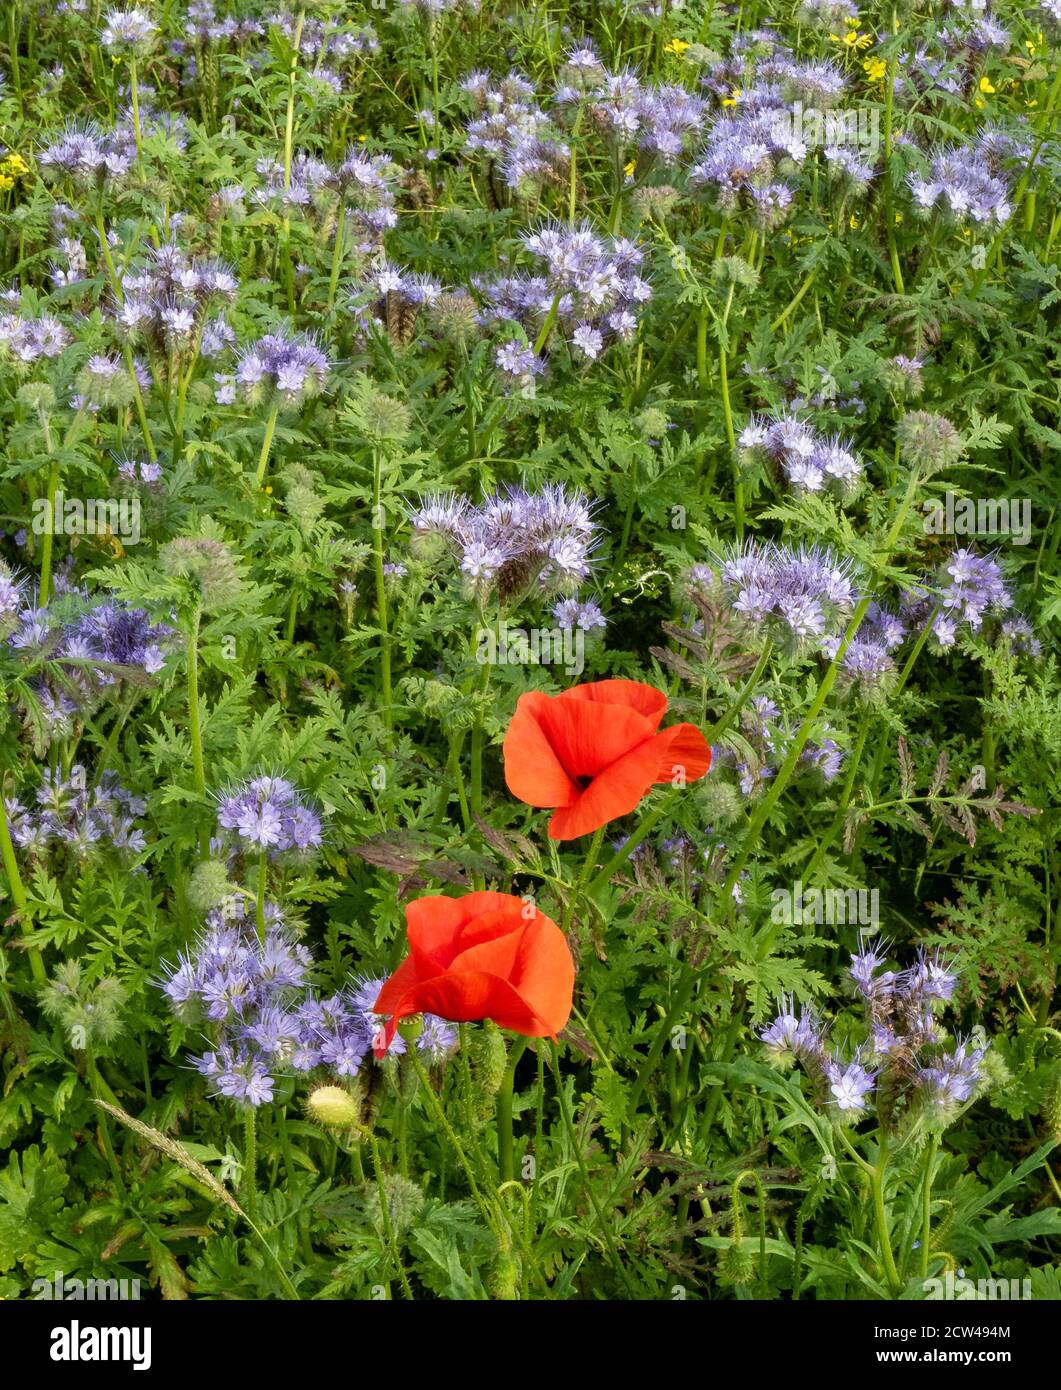 Border of sown insect attracting annuals dominated by blue Phacelia tanacetifolia around maize field Gloucestershire UK benefitting crops and wildlife Stock Photo